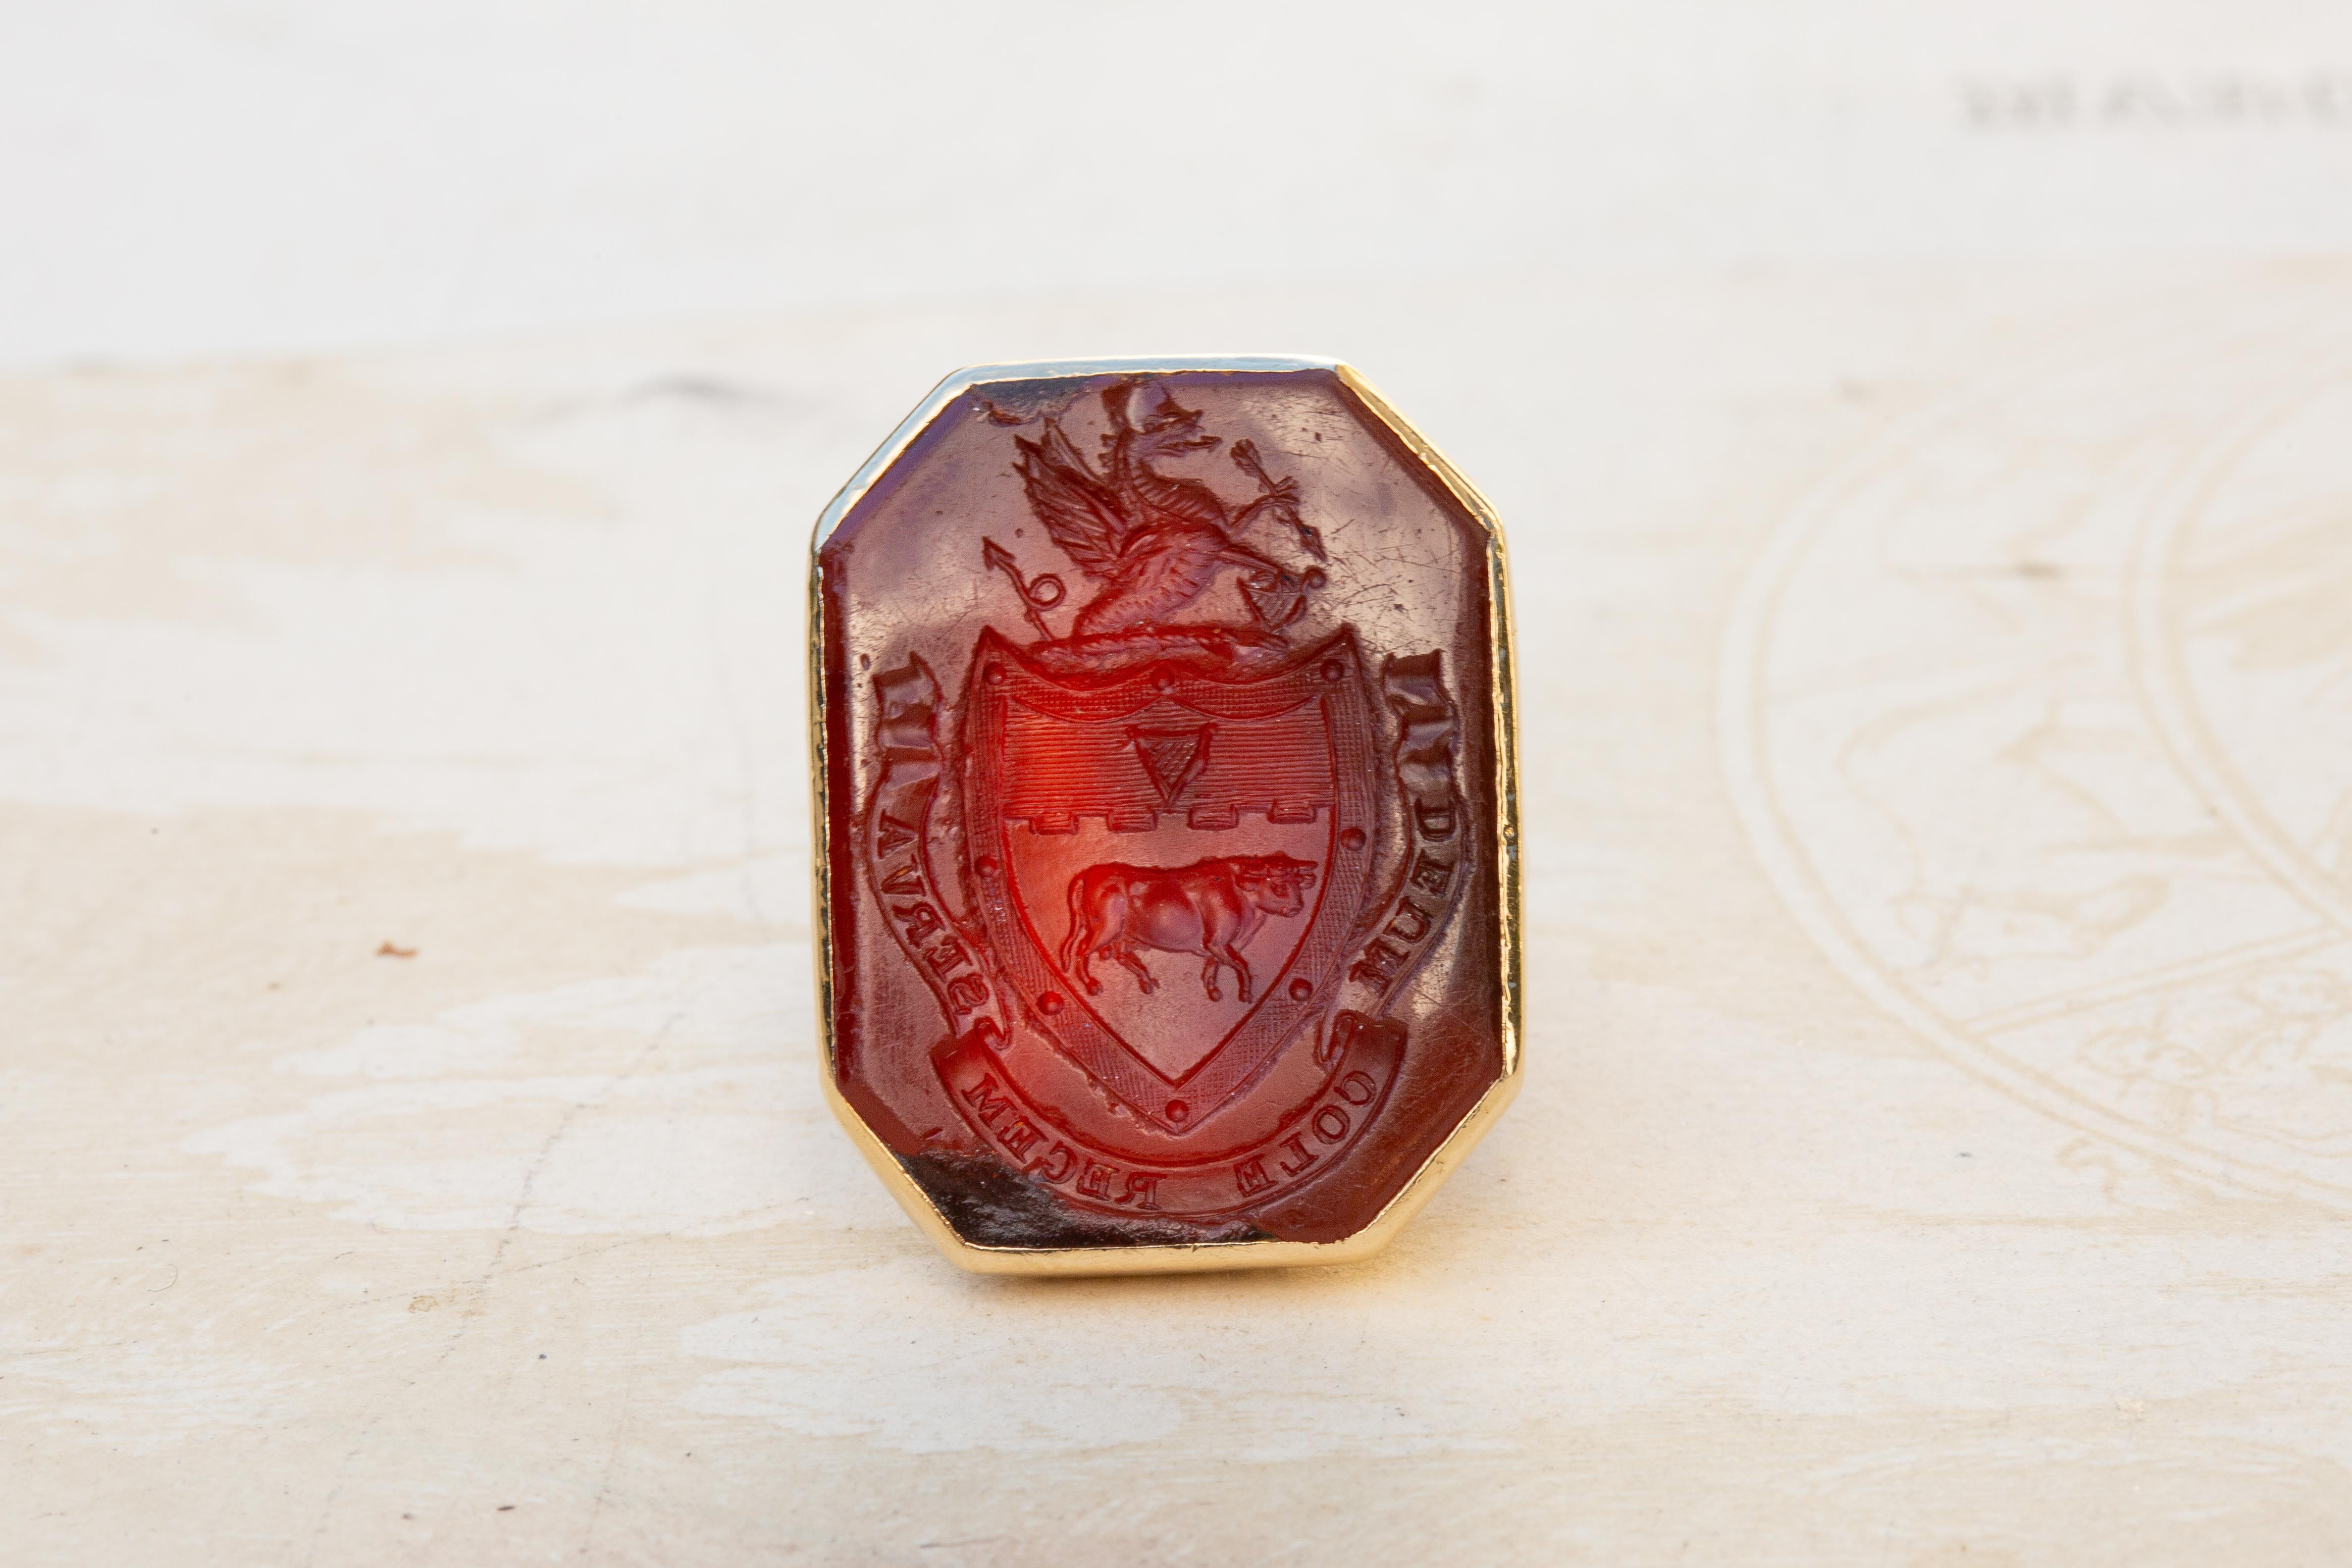 Octagon Cut Antique Georgian Noble Irish 'Cole' Family Coat of Arms Signet Ring Earl's Ring For Sale